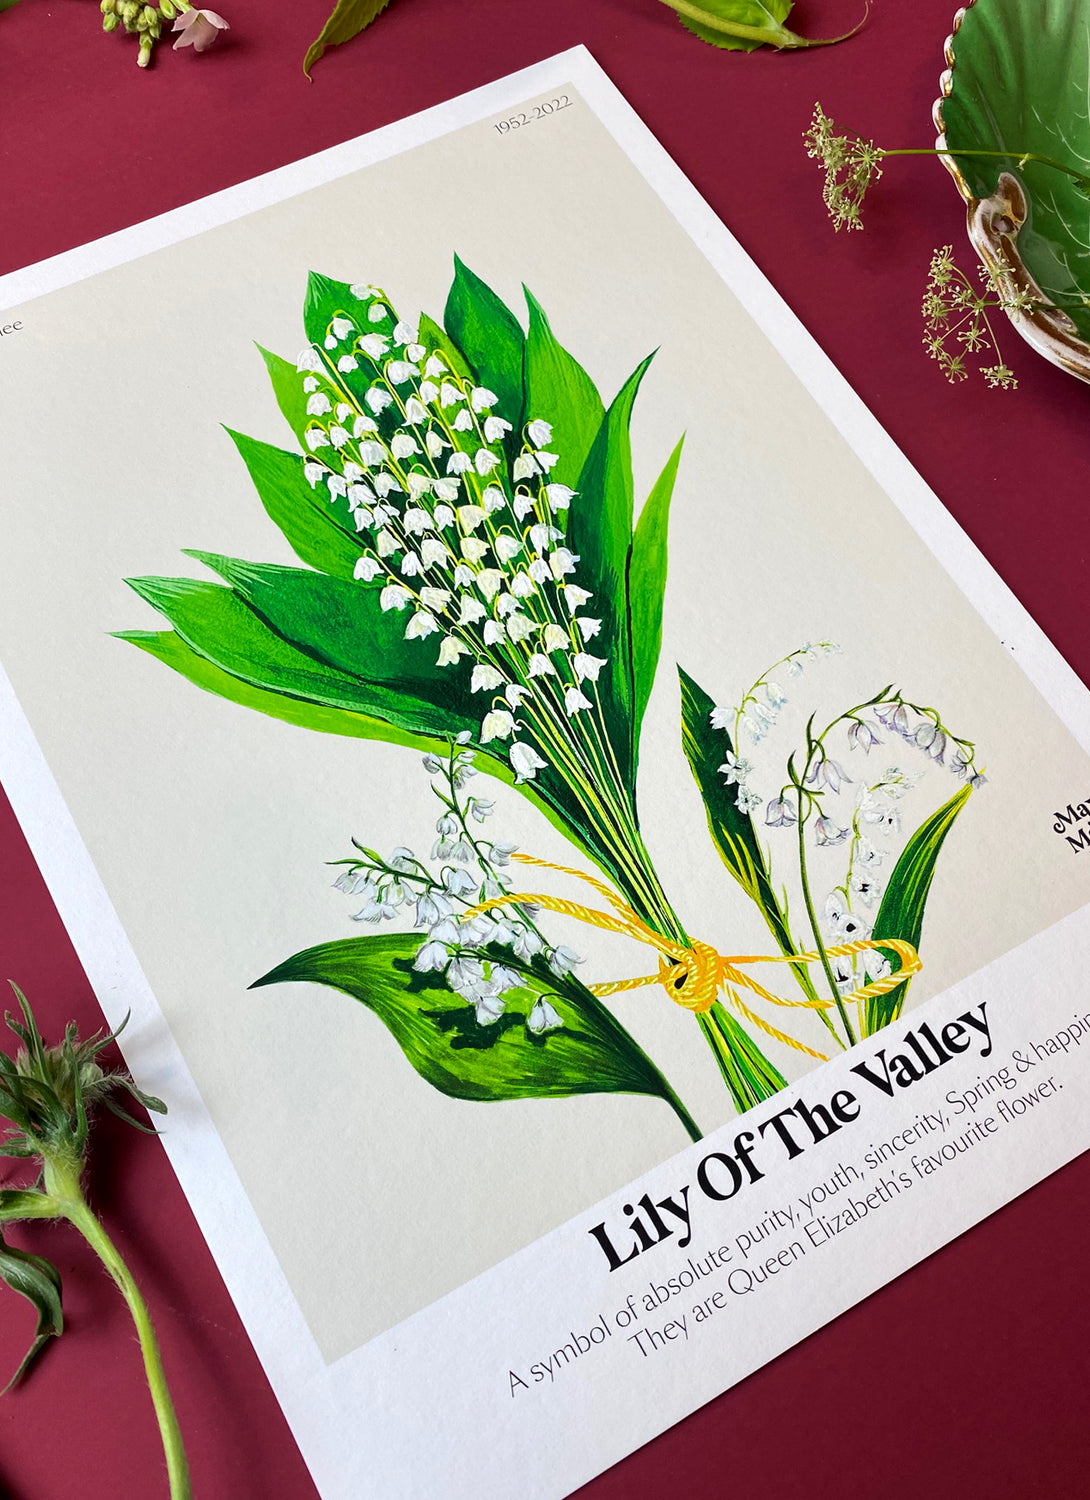 The Language of Flowers Lily Of The Valley Giclée Print